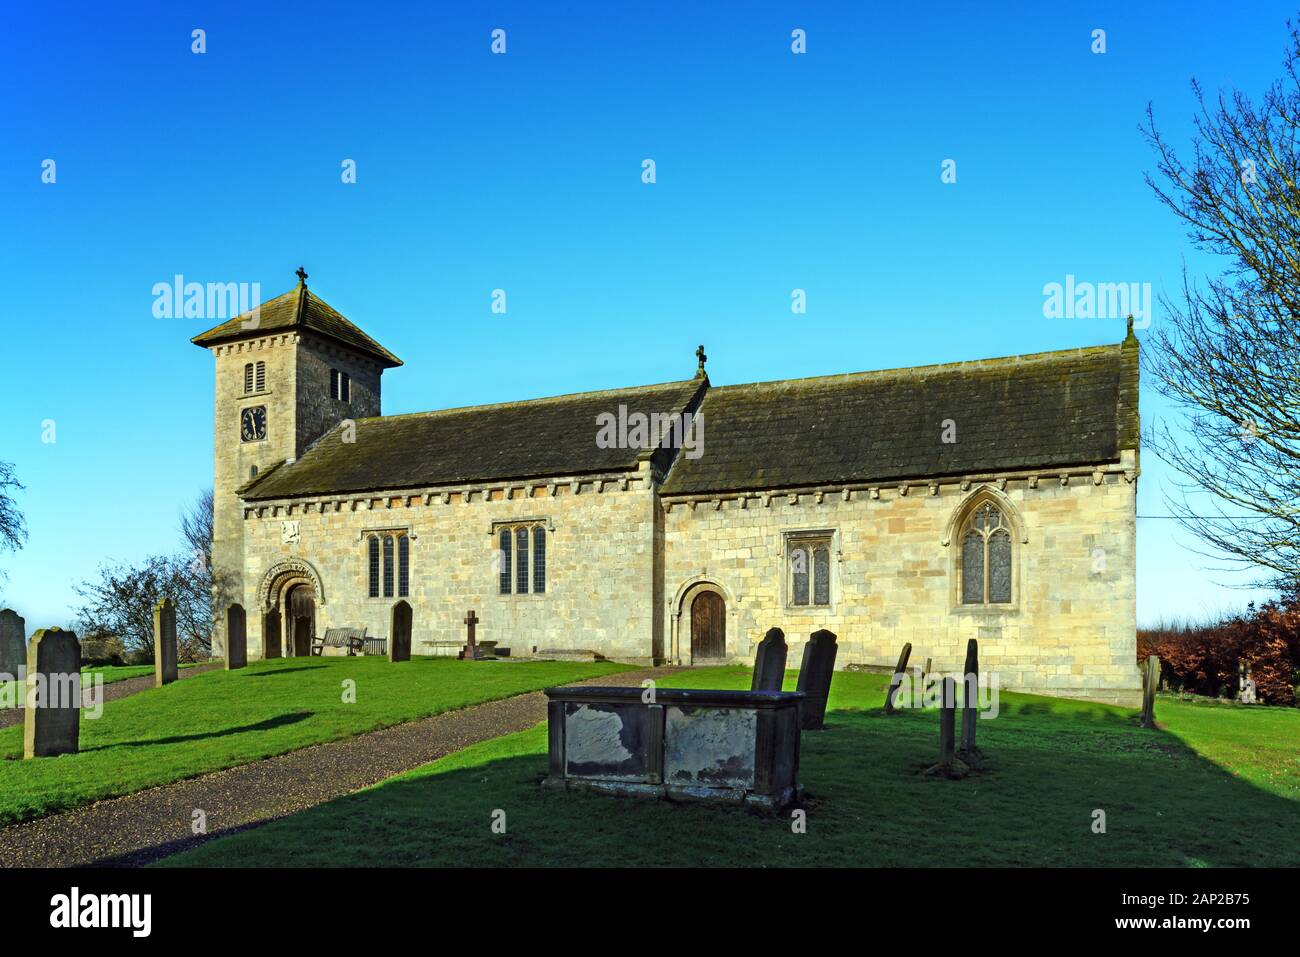 St John the Baptist's Church in Healaugh (North Yorkshire) was built in Norman times and is now a grade II* listed building. Stock Photo